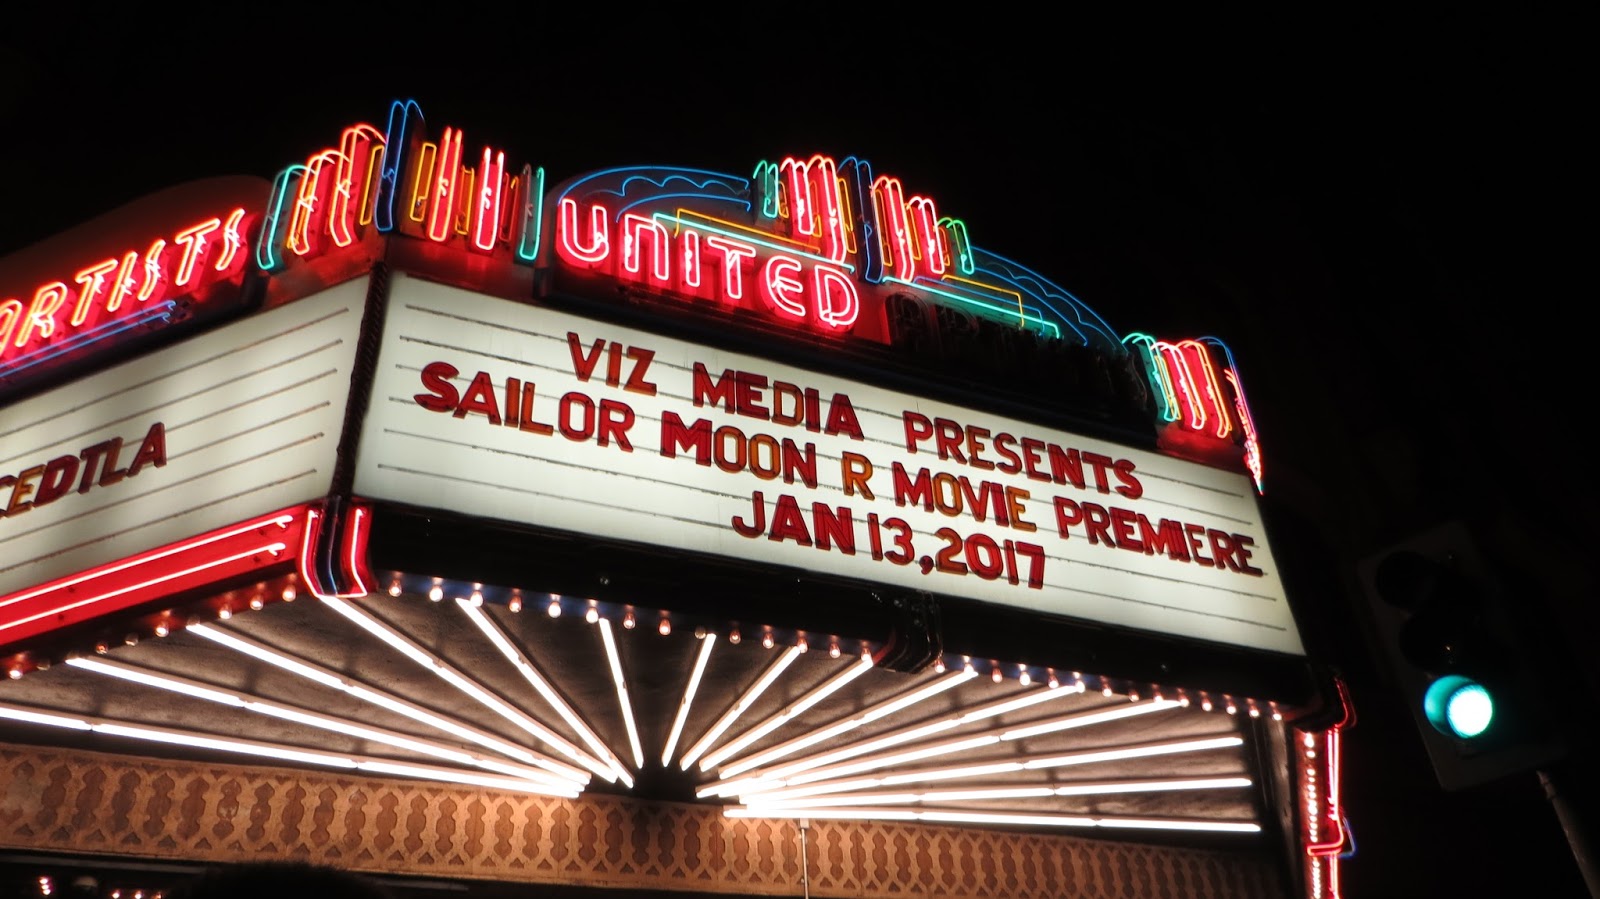 Sailor Moon R The Movie Makes It's U.S. Debut on the Big Screen to Fight  for Love and Justice with Los Angeles Premiere Event!